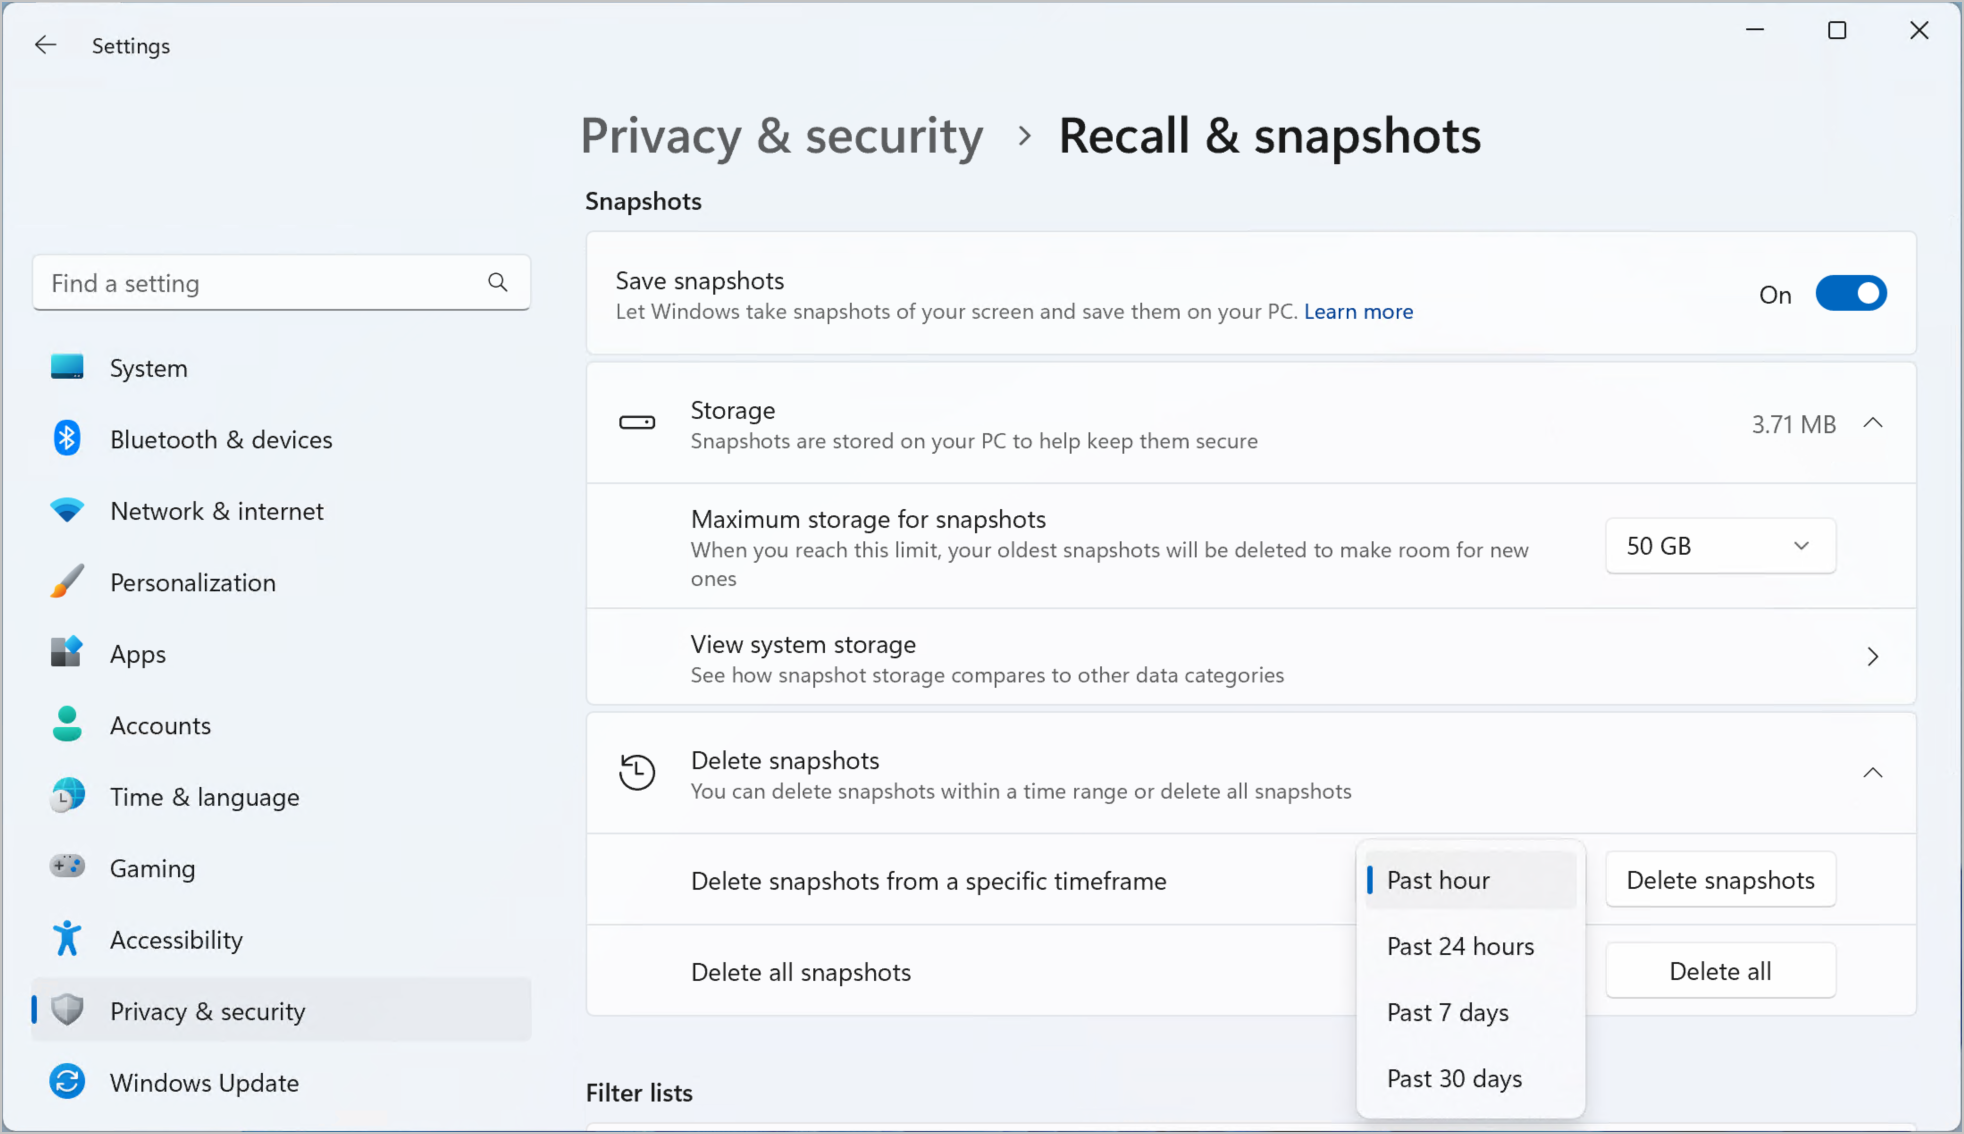 Screenshot of the Recall & snapshots page in Windows settings displaying the timeframe options for deleting snapshots